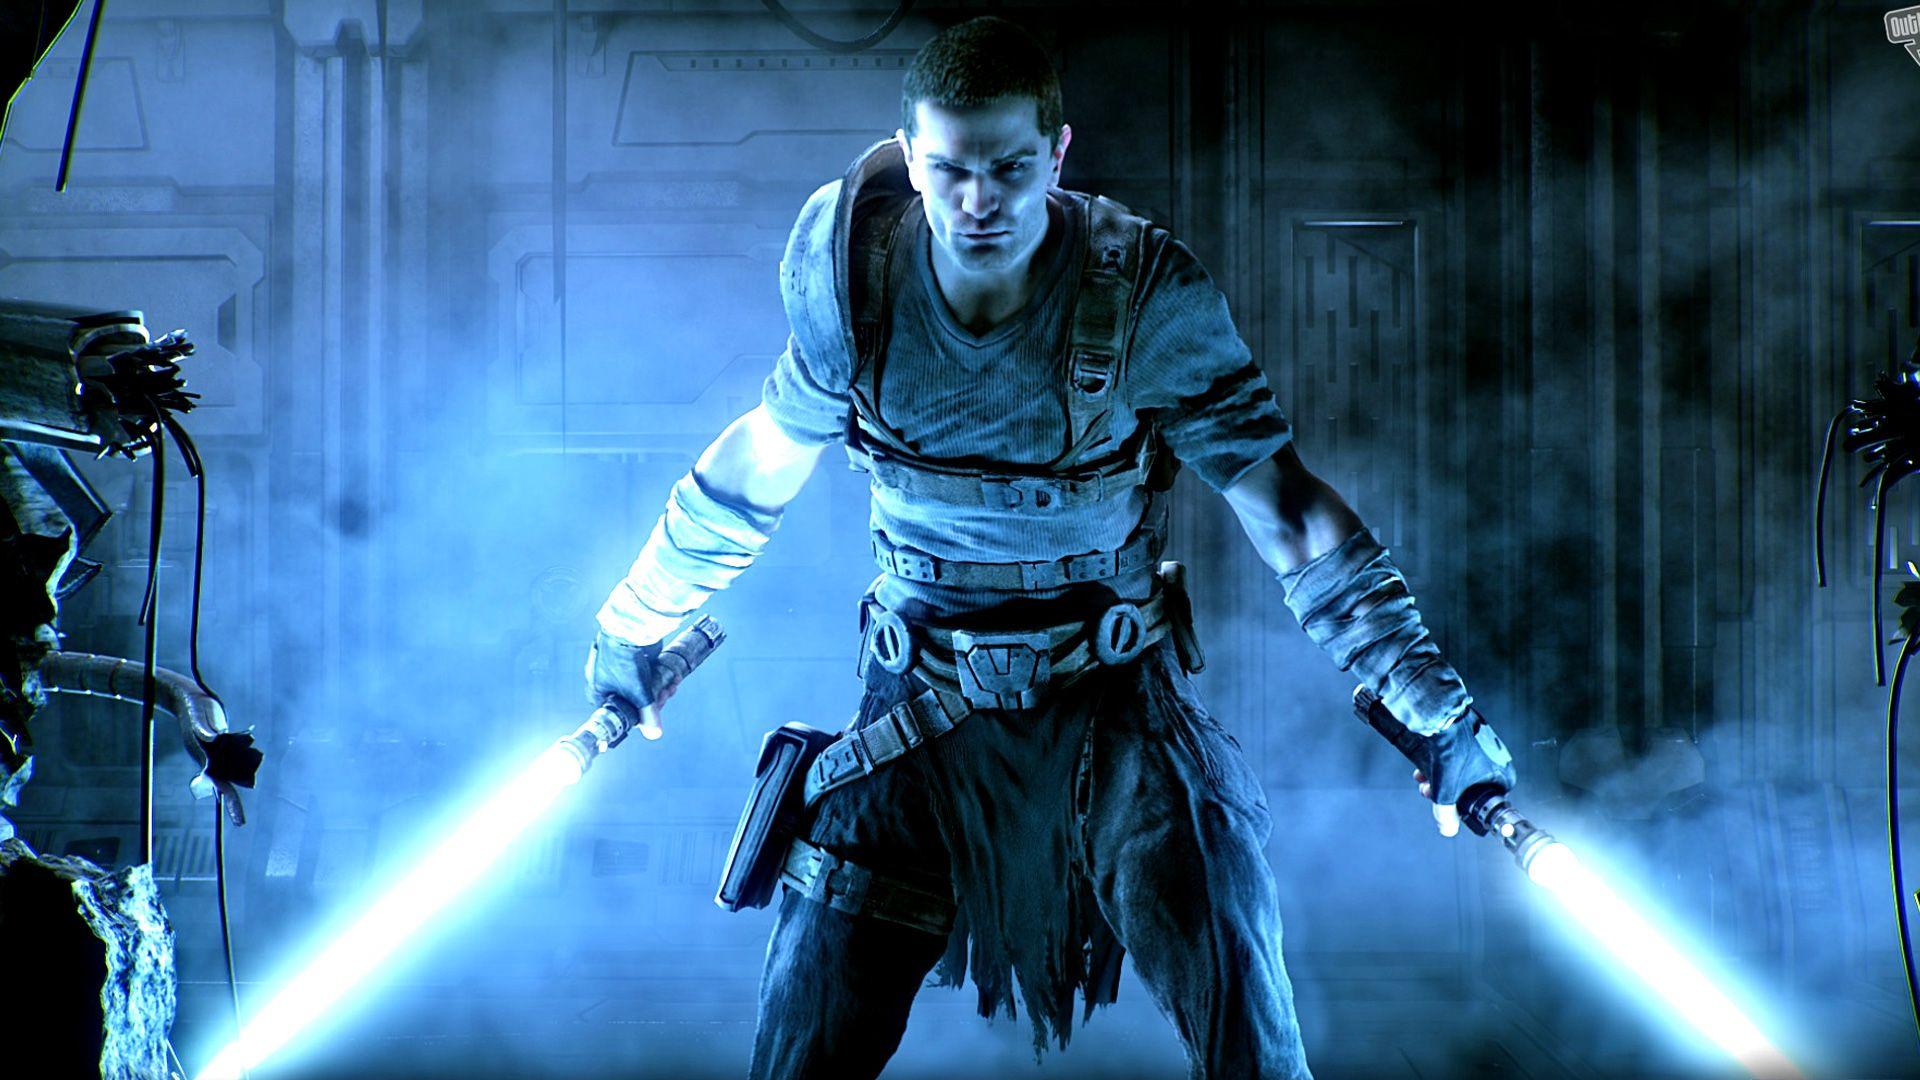 Star Wars: Jedi Fallen Order video game officially announced OnMSFT